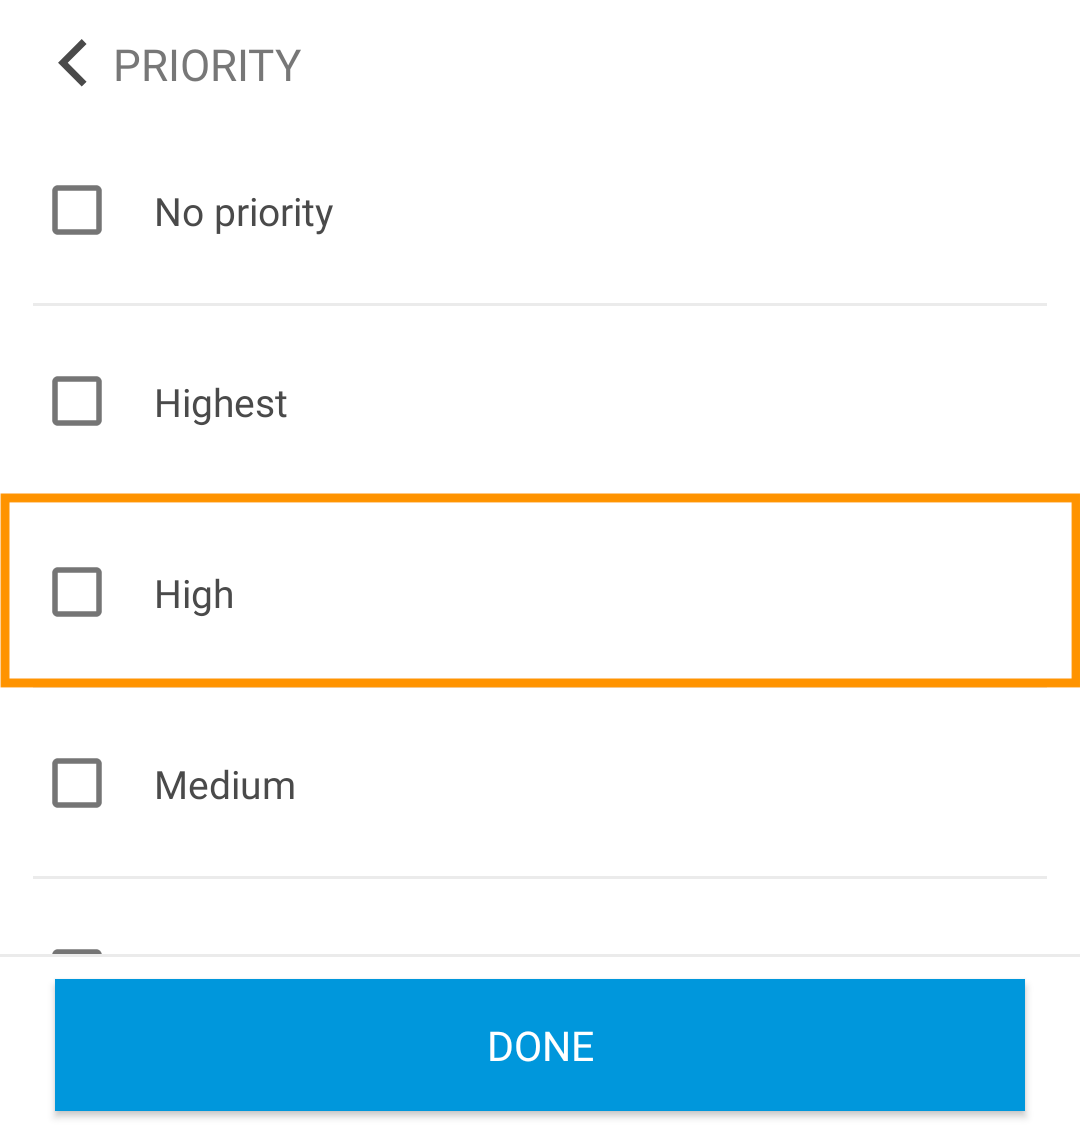 The priority filter with the High value highlighted.